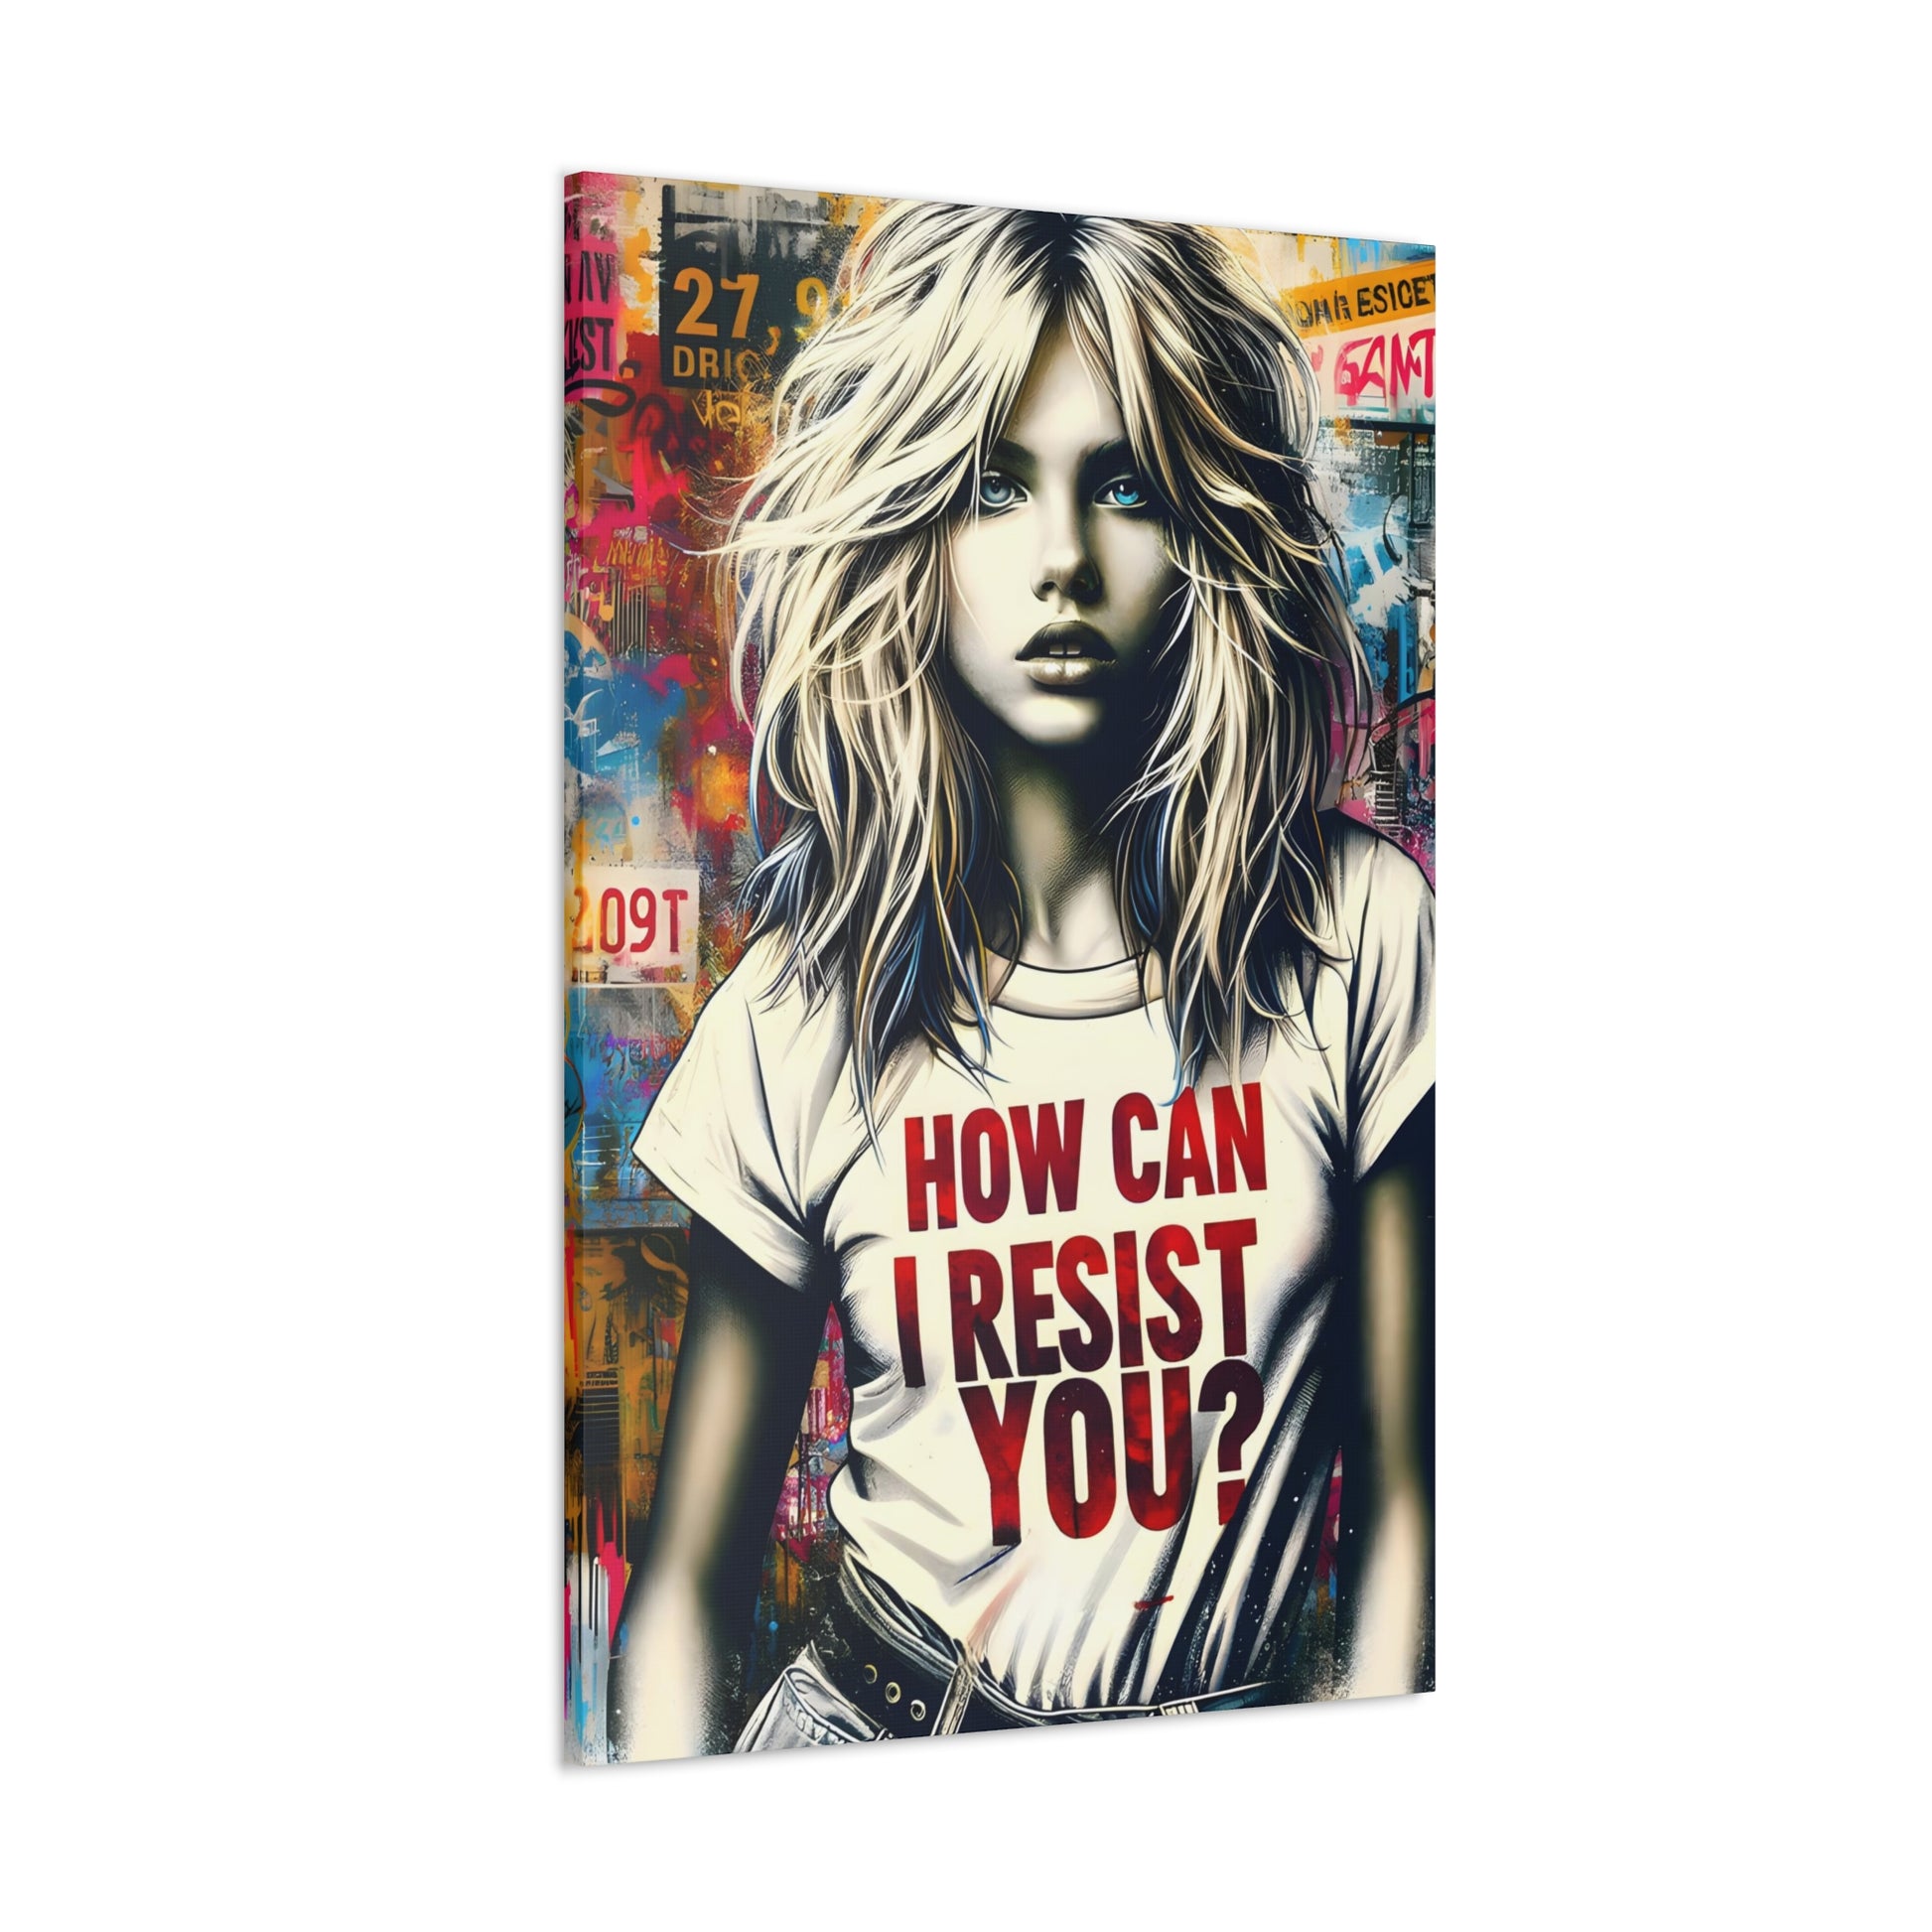 vertical and angled AI-generated art, 'Resist You? – An ABBA Echo,' with a modern Aphrodite in urban setting, her shirt reading 'HOW CAN I RESIST YOU?' amidst colorful graffiti, echoing ABBA's themes.